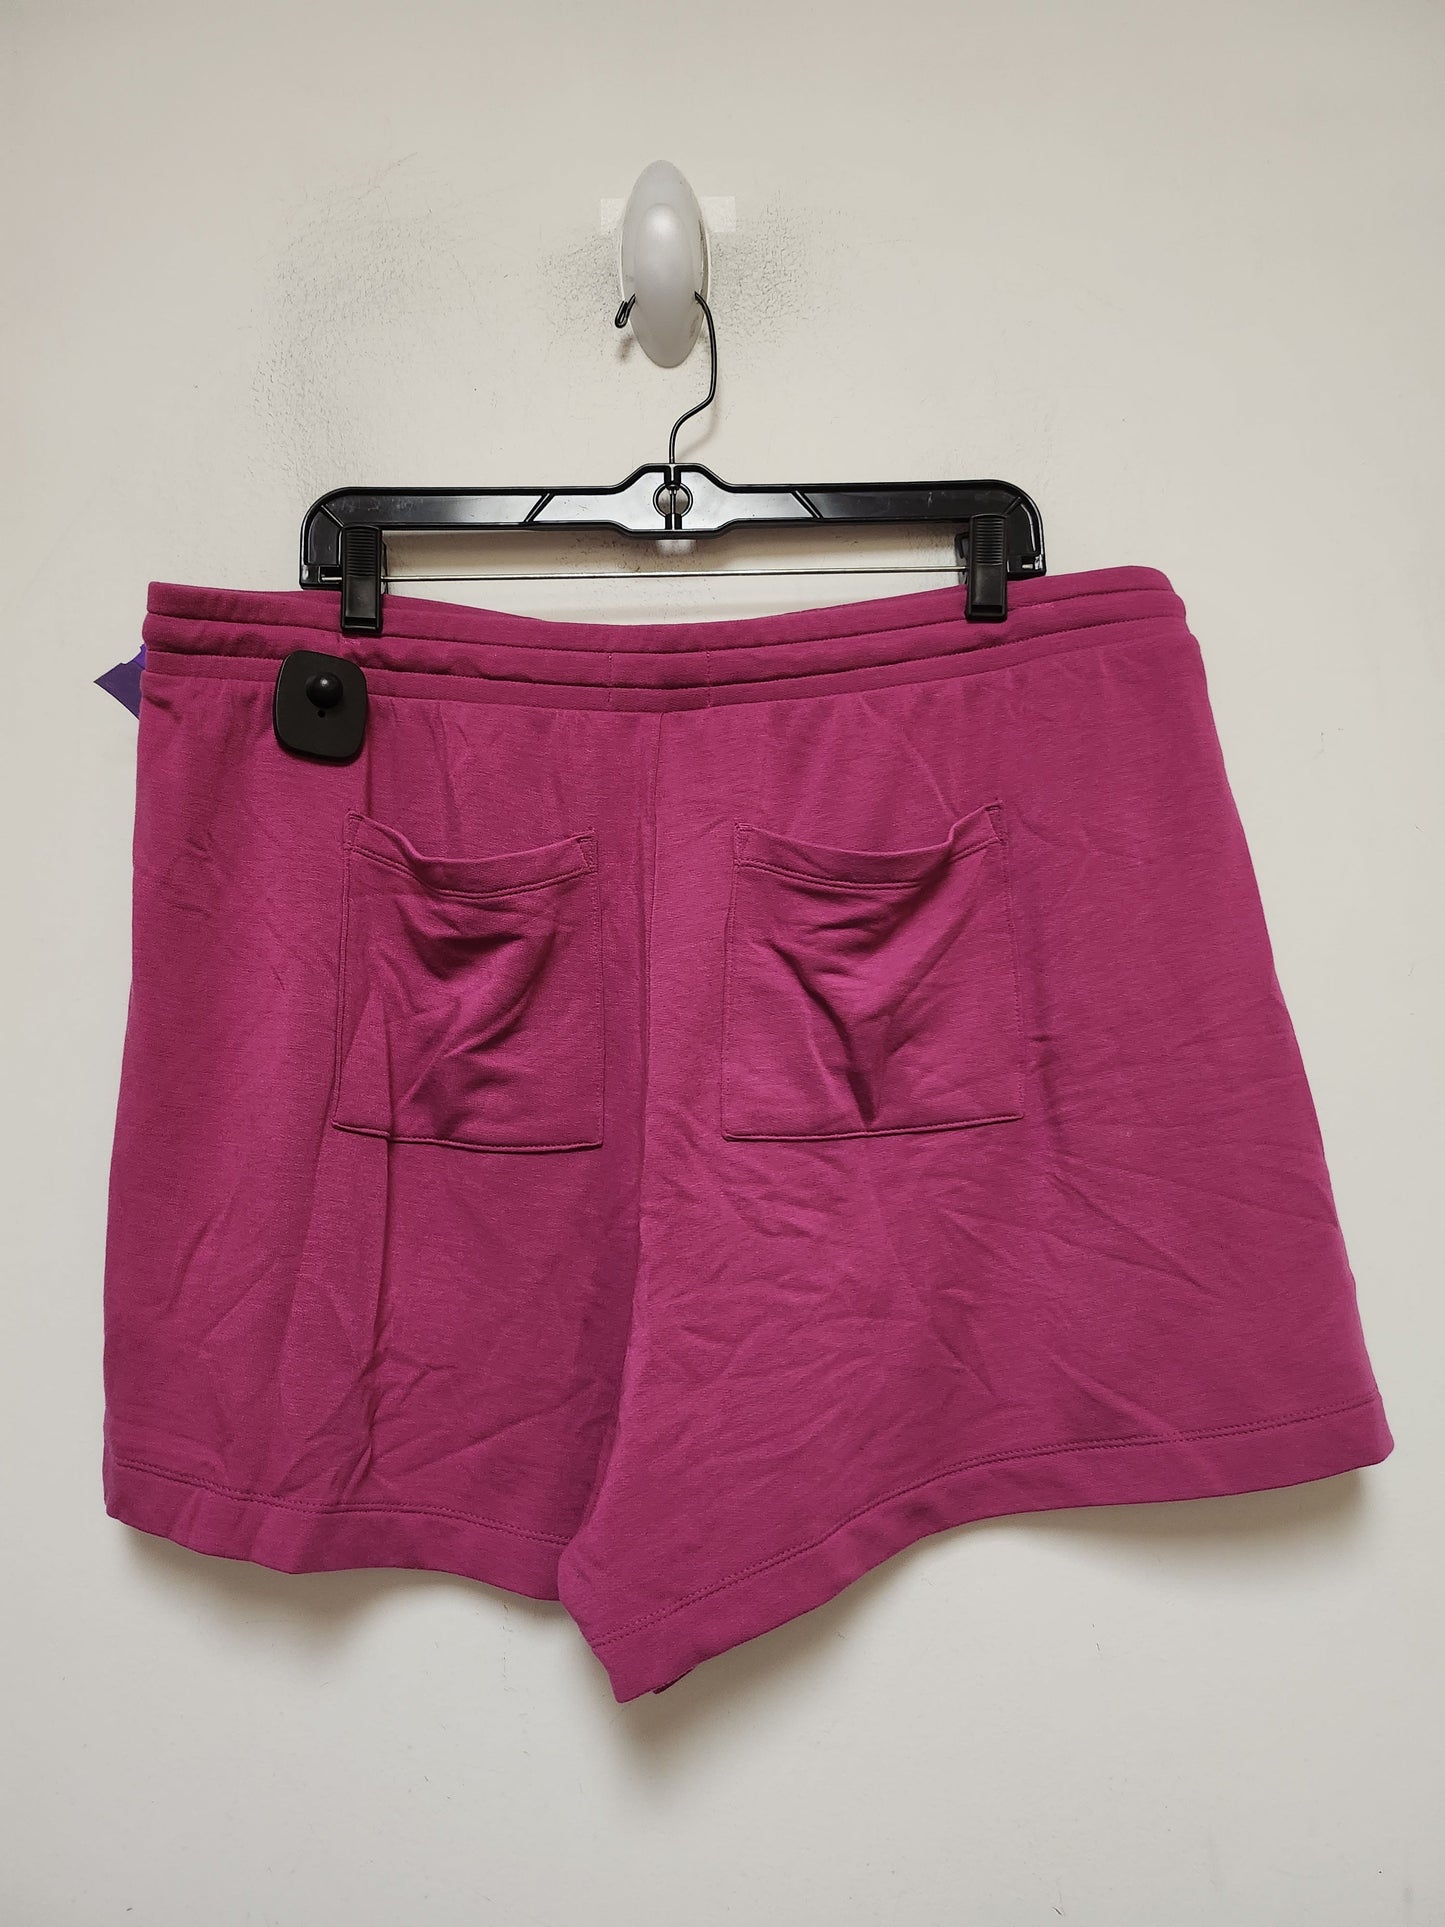 Pink Athletic Shorts Lou And Grey, Size Xl